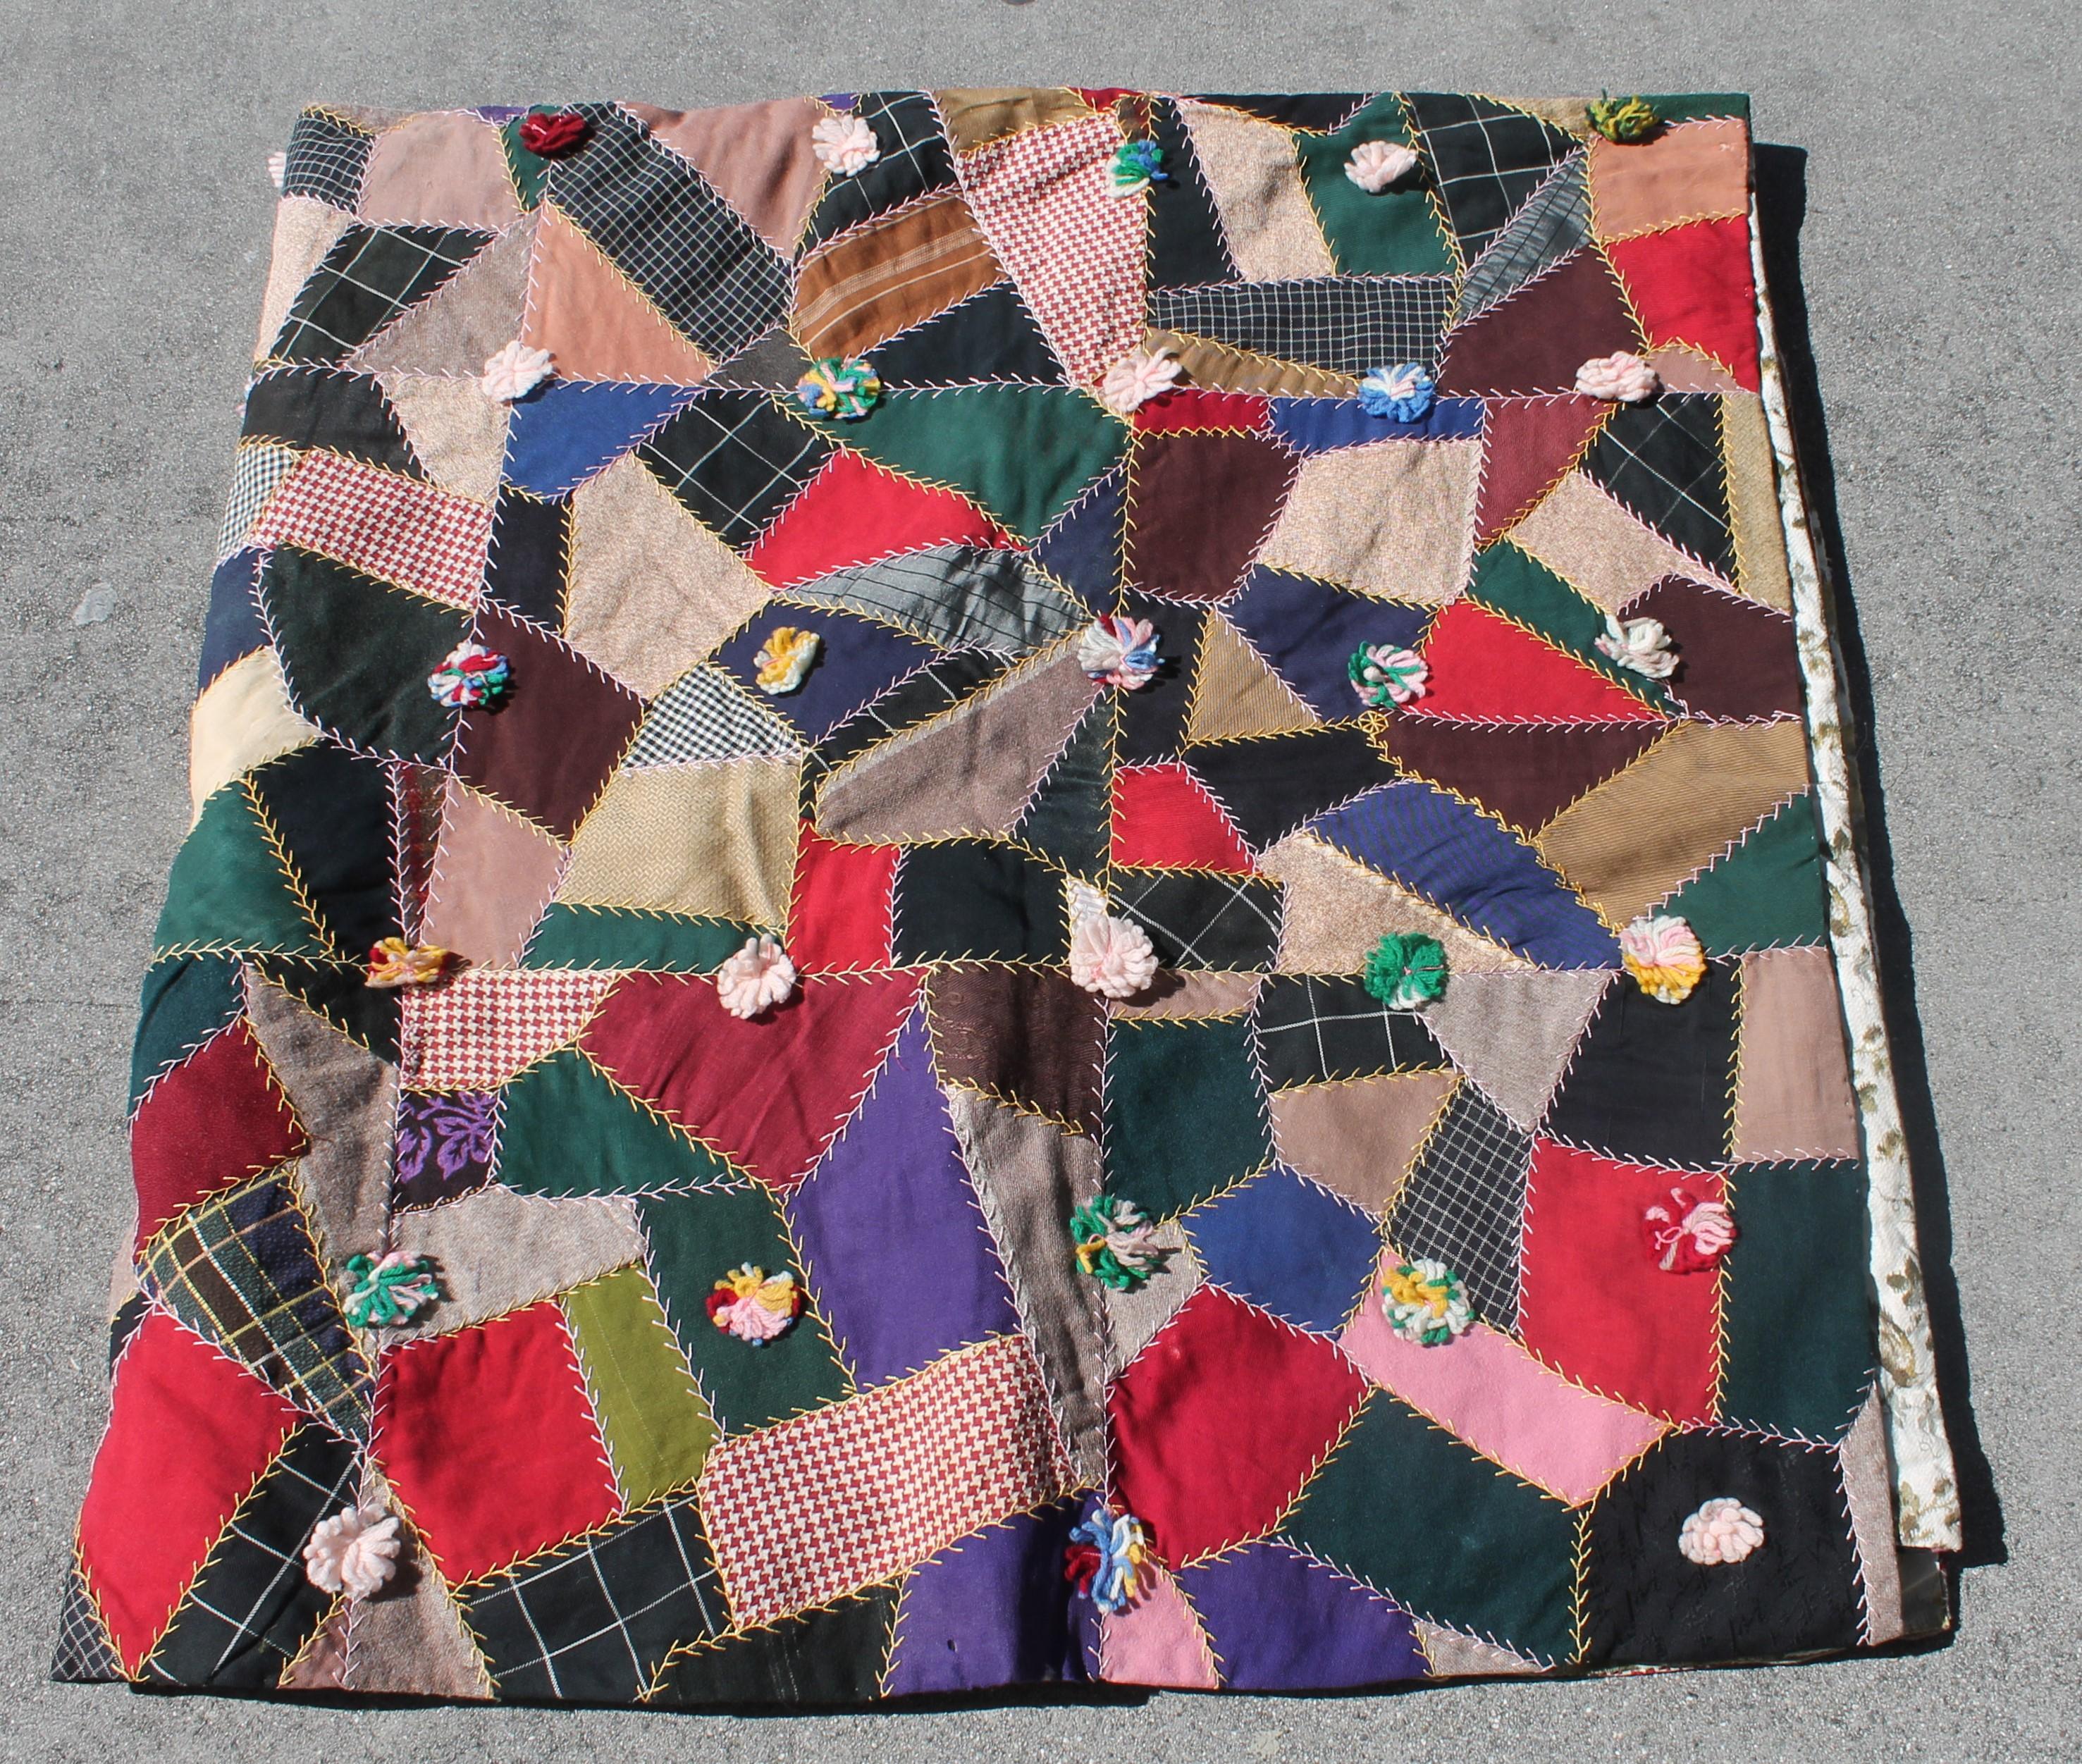 This fun and folky hand pieced and quilted crazy quilt is in great as found condition with folky little ties as well. The condition is very good and as well as the hand tied wool ties. This contained crazy quilt / comforter was from Lancaster